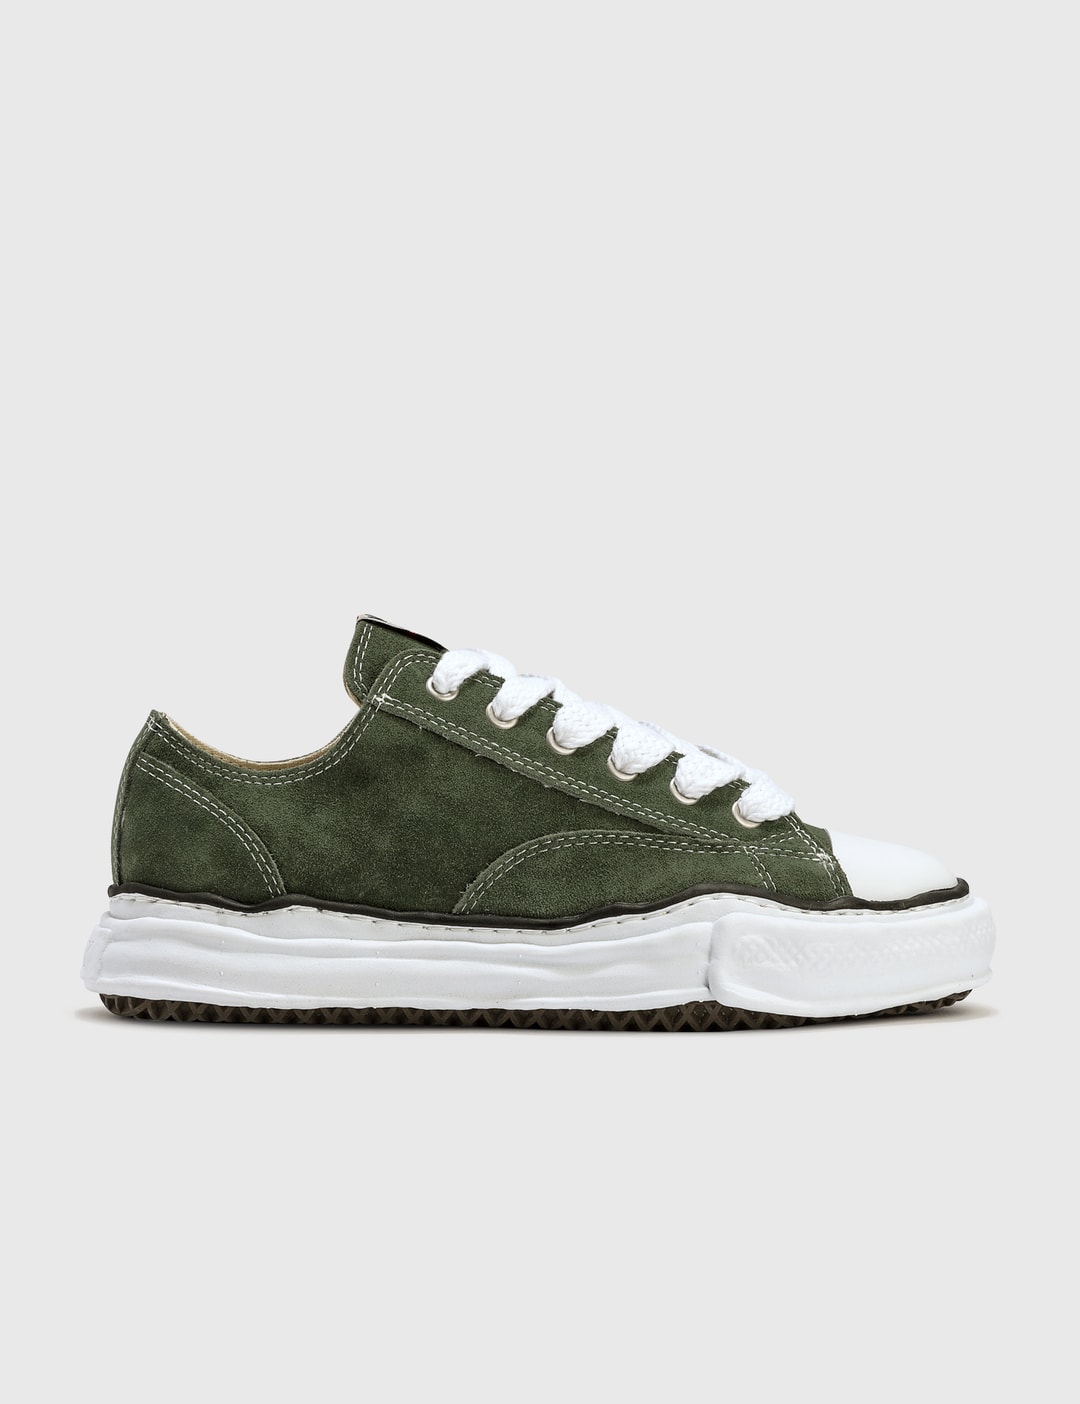 Maison Mihara Yasuhiro - Suede Peterson Low | HBX - Globally Curated ...